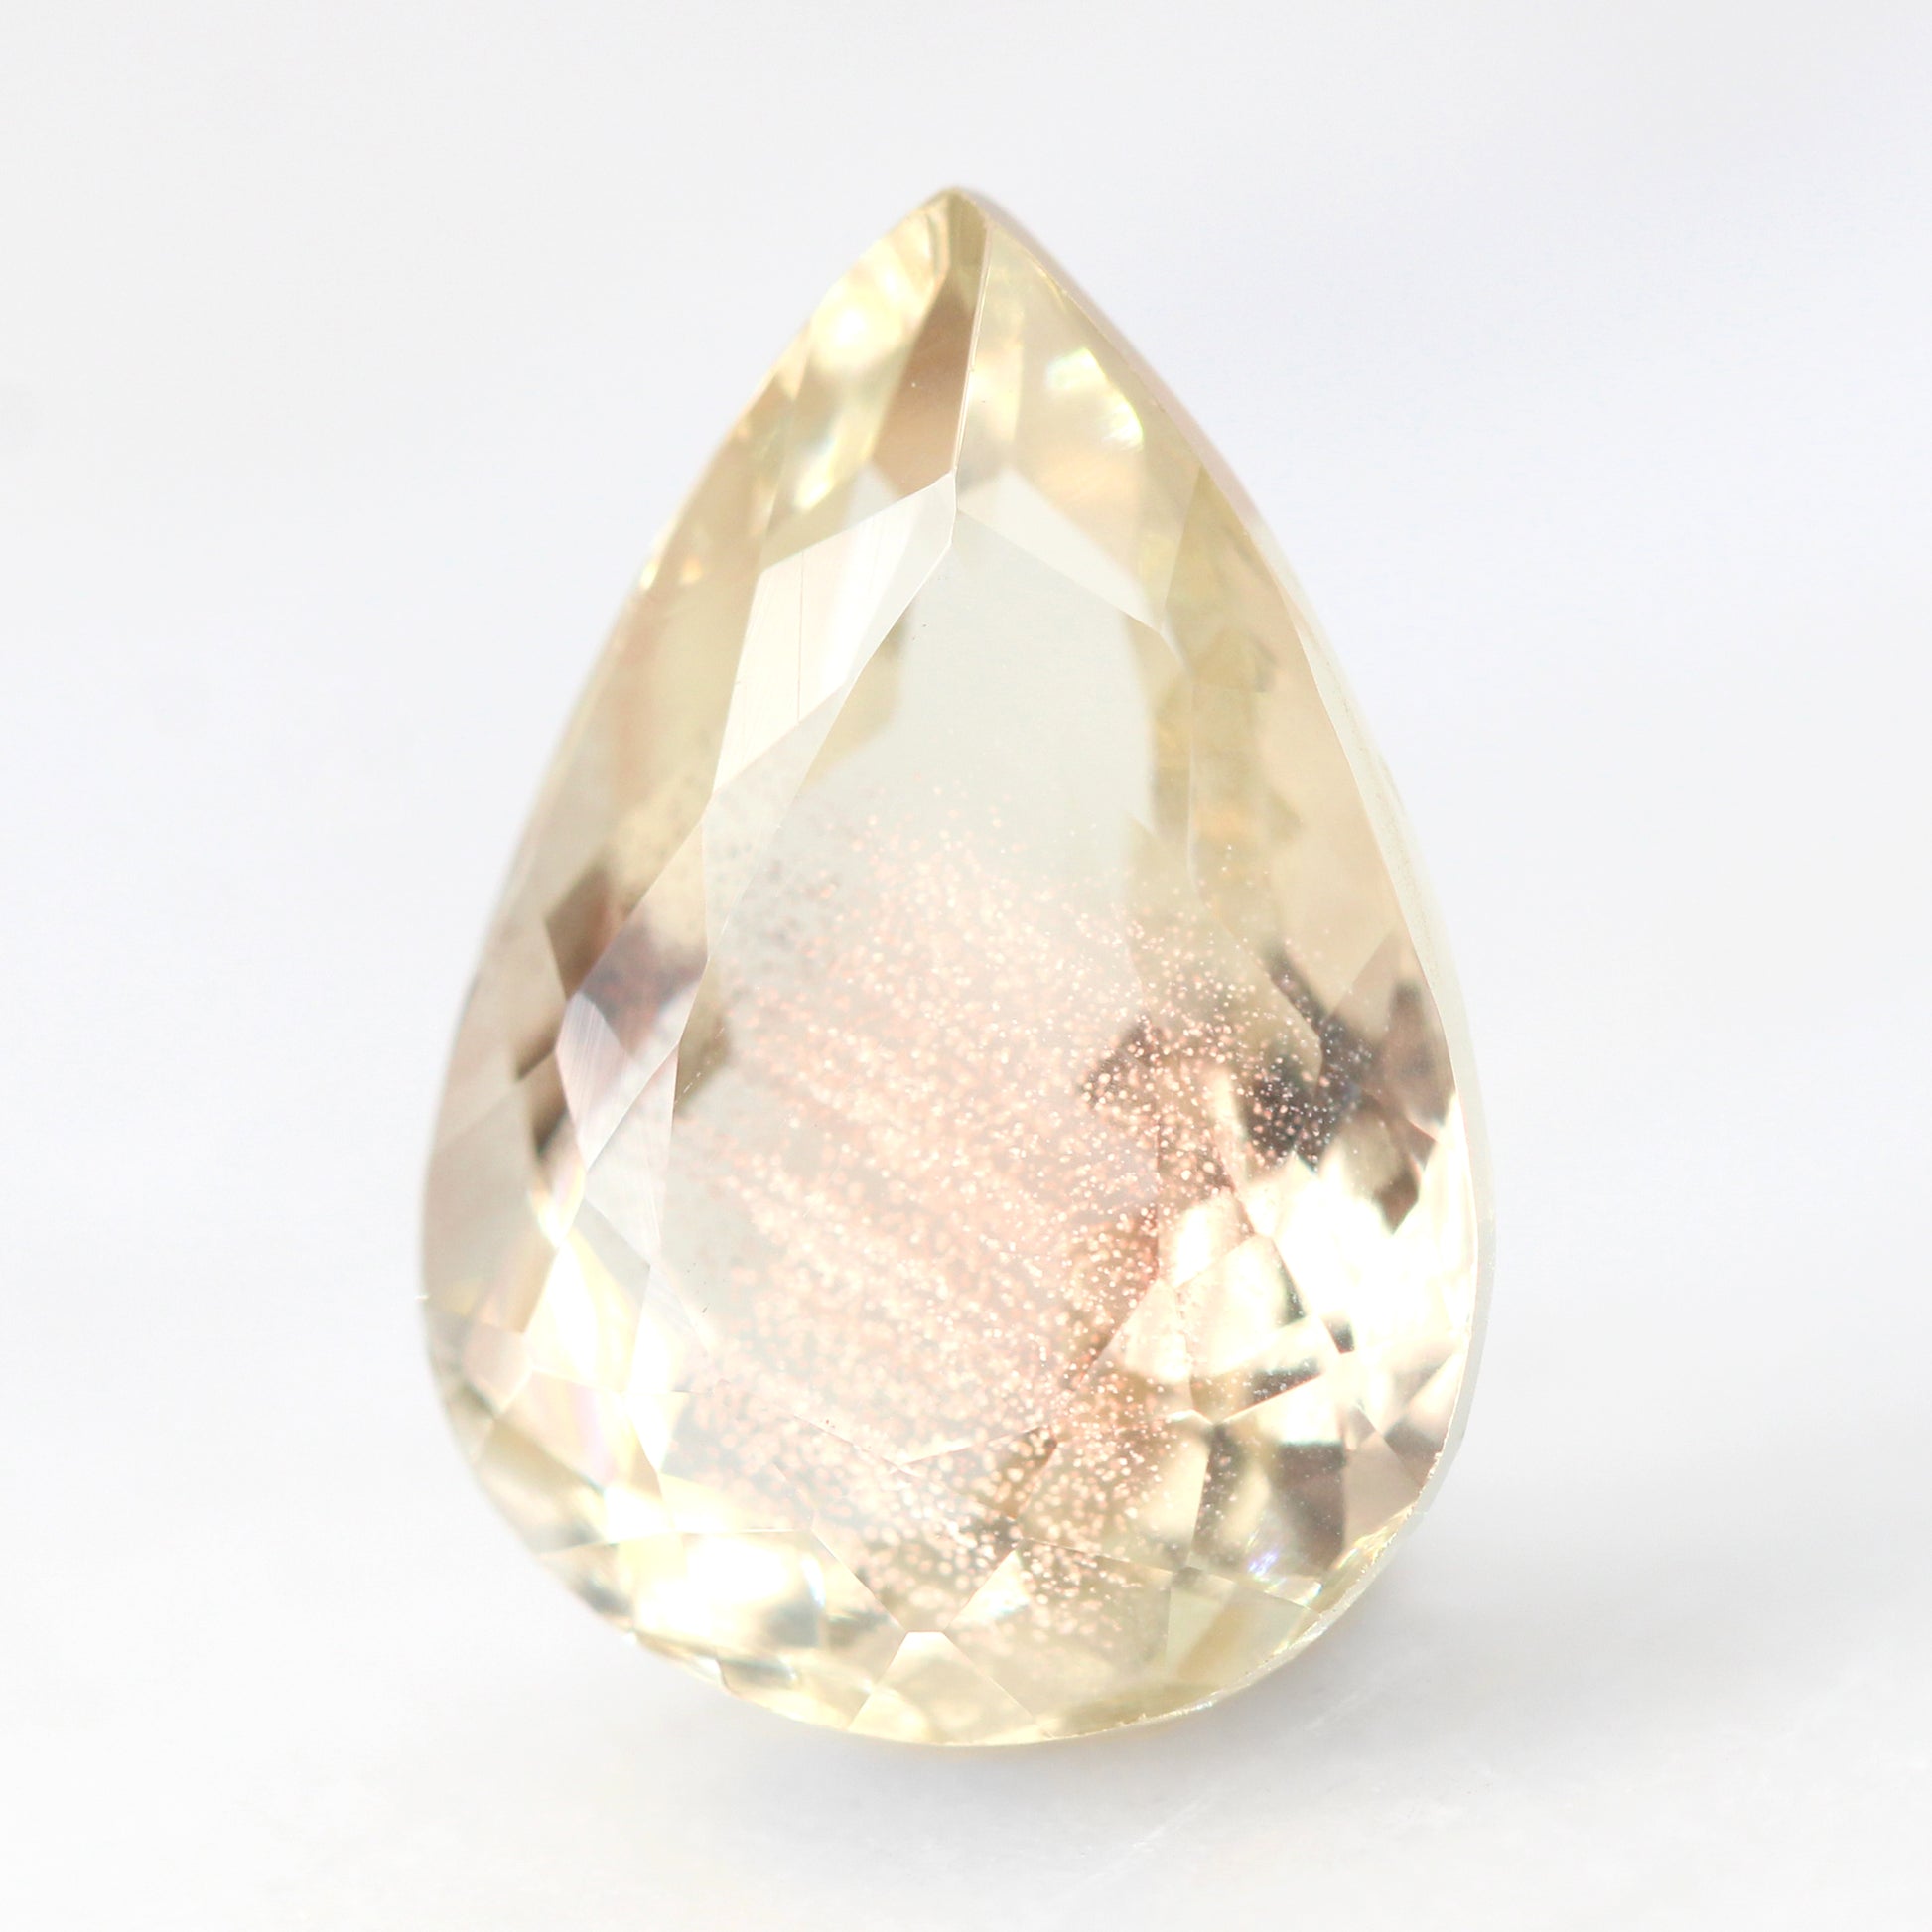 4.25 Carat Golden Pear Sunstone for Custom Work - Inventory Code PSUN425 - Midwinter Co. Alternative Bridal Rings and Modern Fine Jewelry